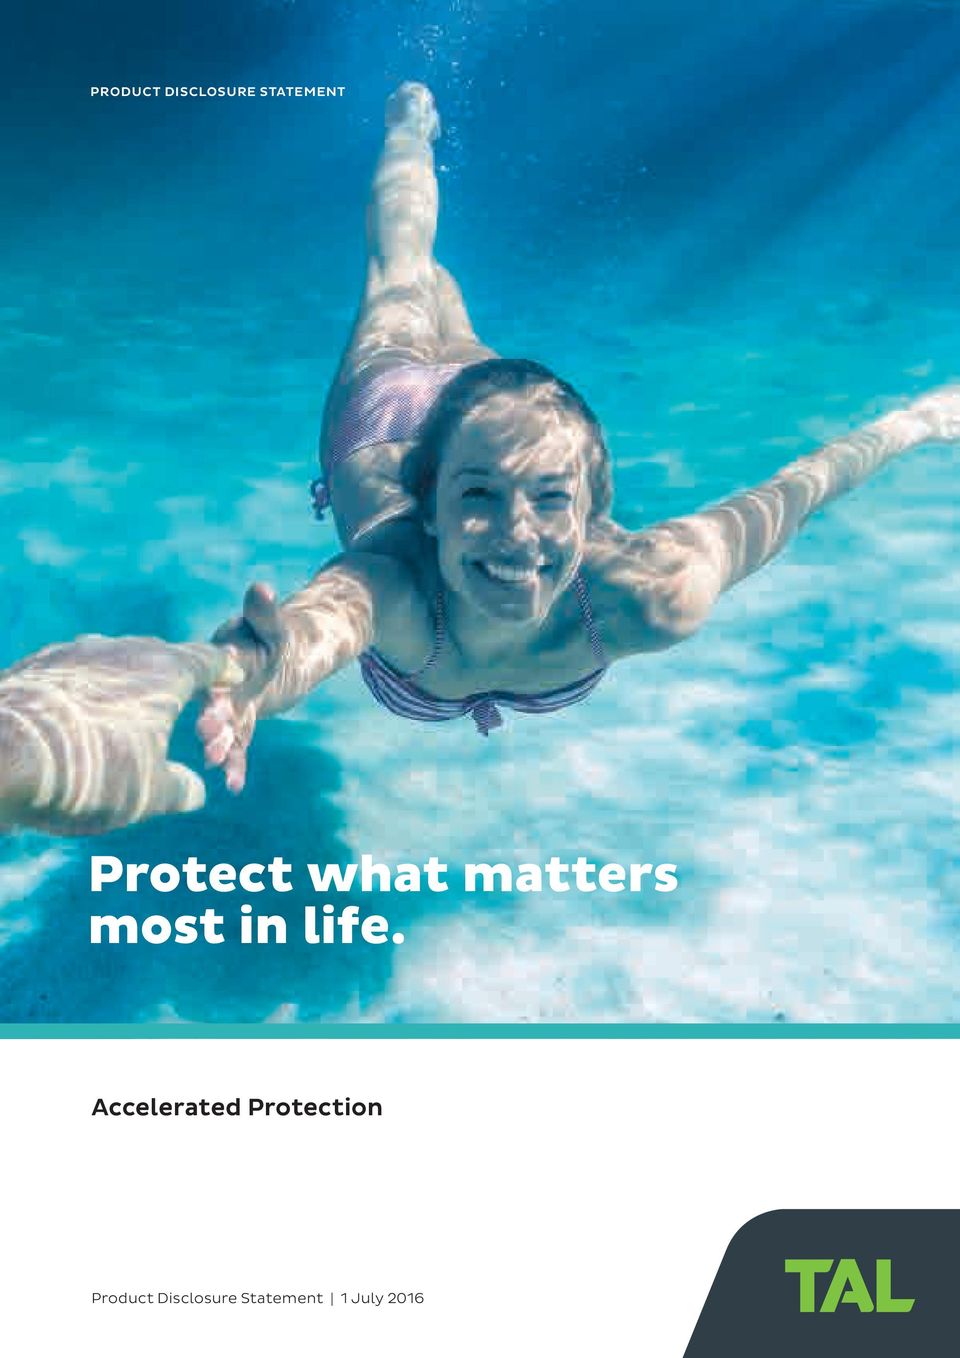 life. Accelerated Protection